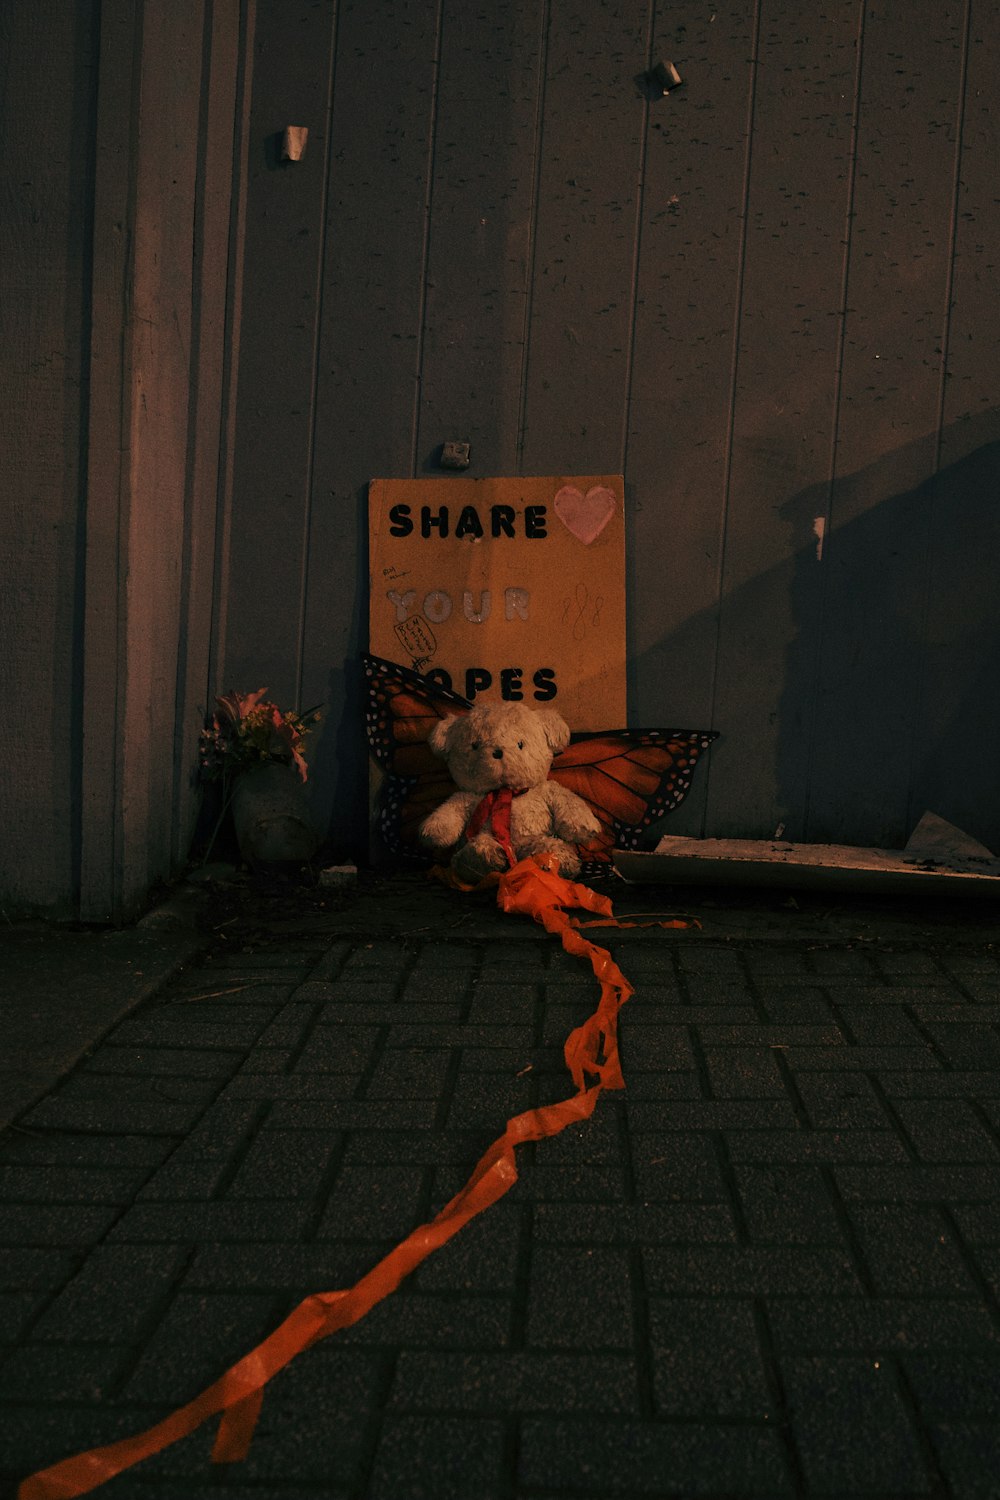 a teddy bear sitting on the ground next to a sign